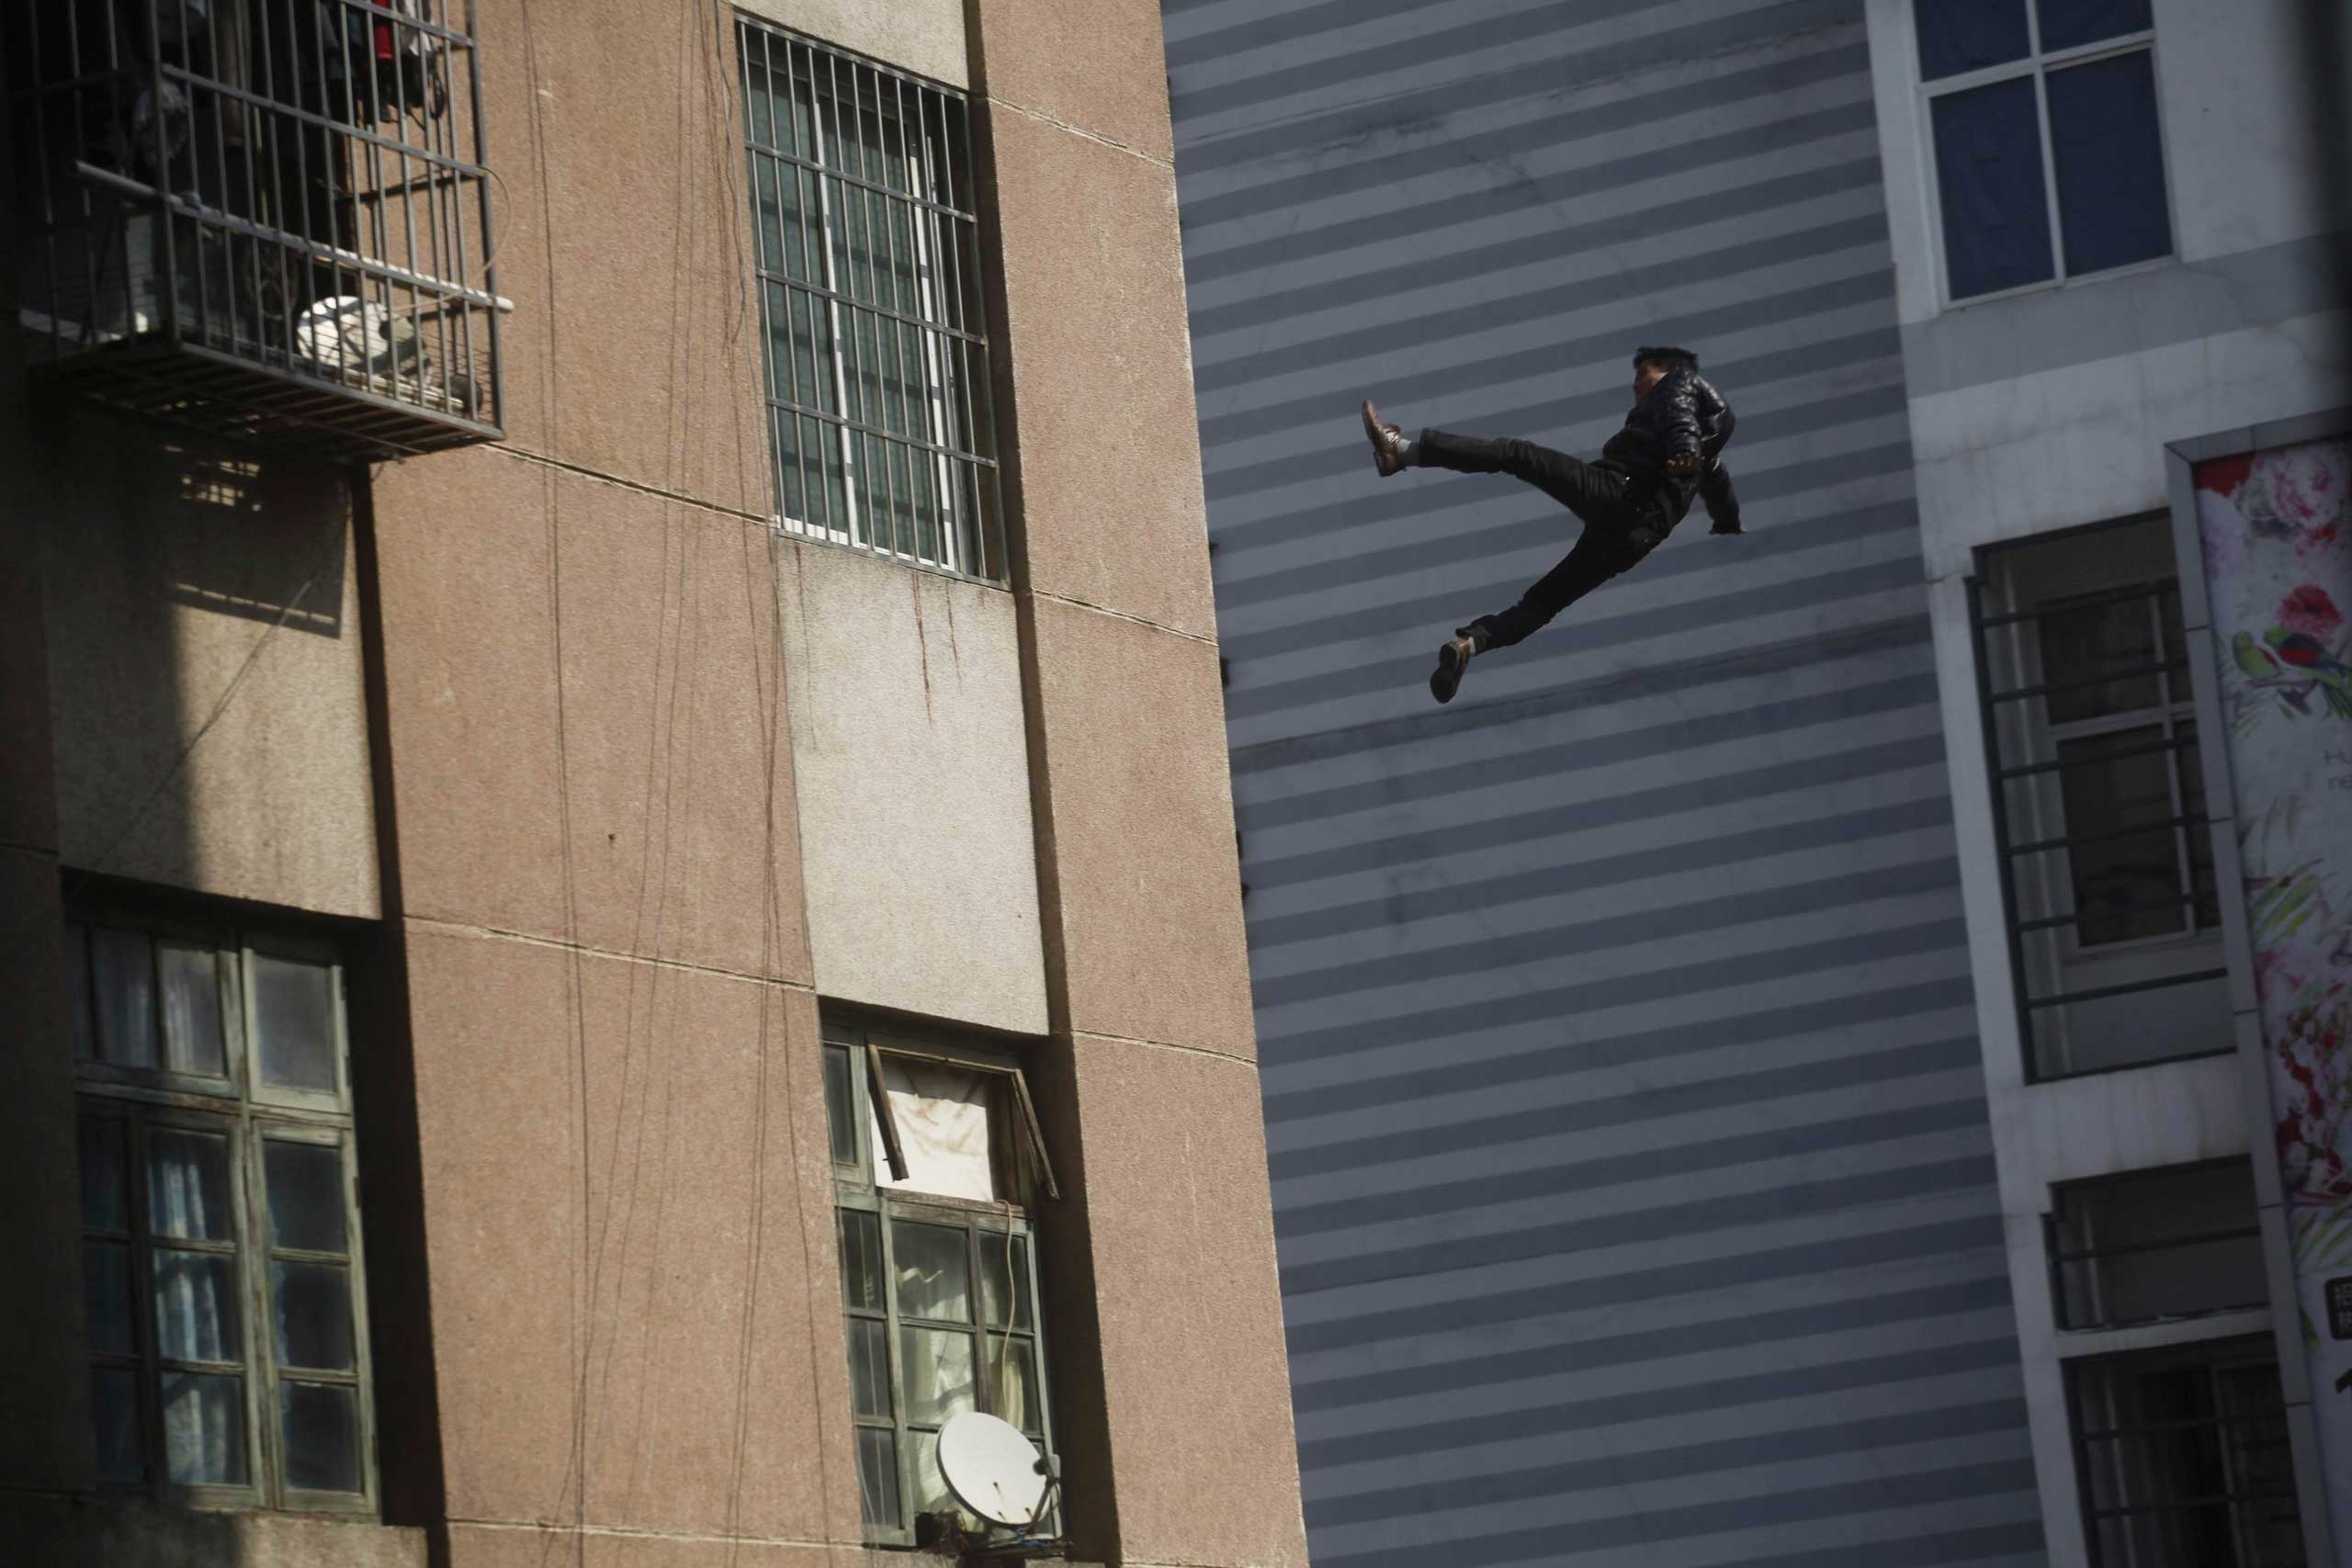 Dec. 8, 2014. A man falls from the top of a residential building in Liuzhou, Guangxi Zhuang Autonomous Region. Witnesses said that the man, who did not survive, slipped off from the edge of the building as he was shouting and stepping back from people trying to persuade him to leave the roof top.